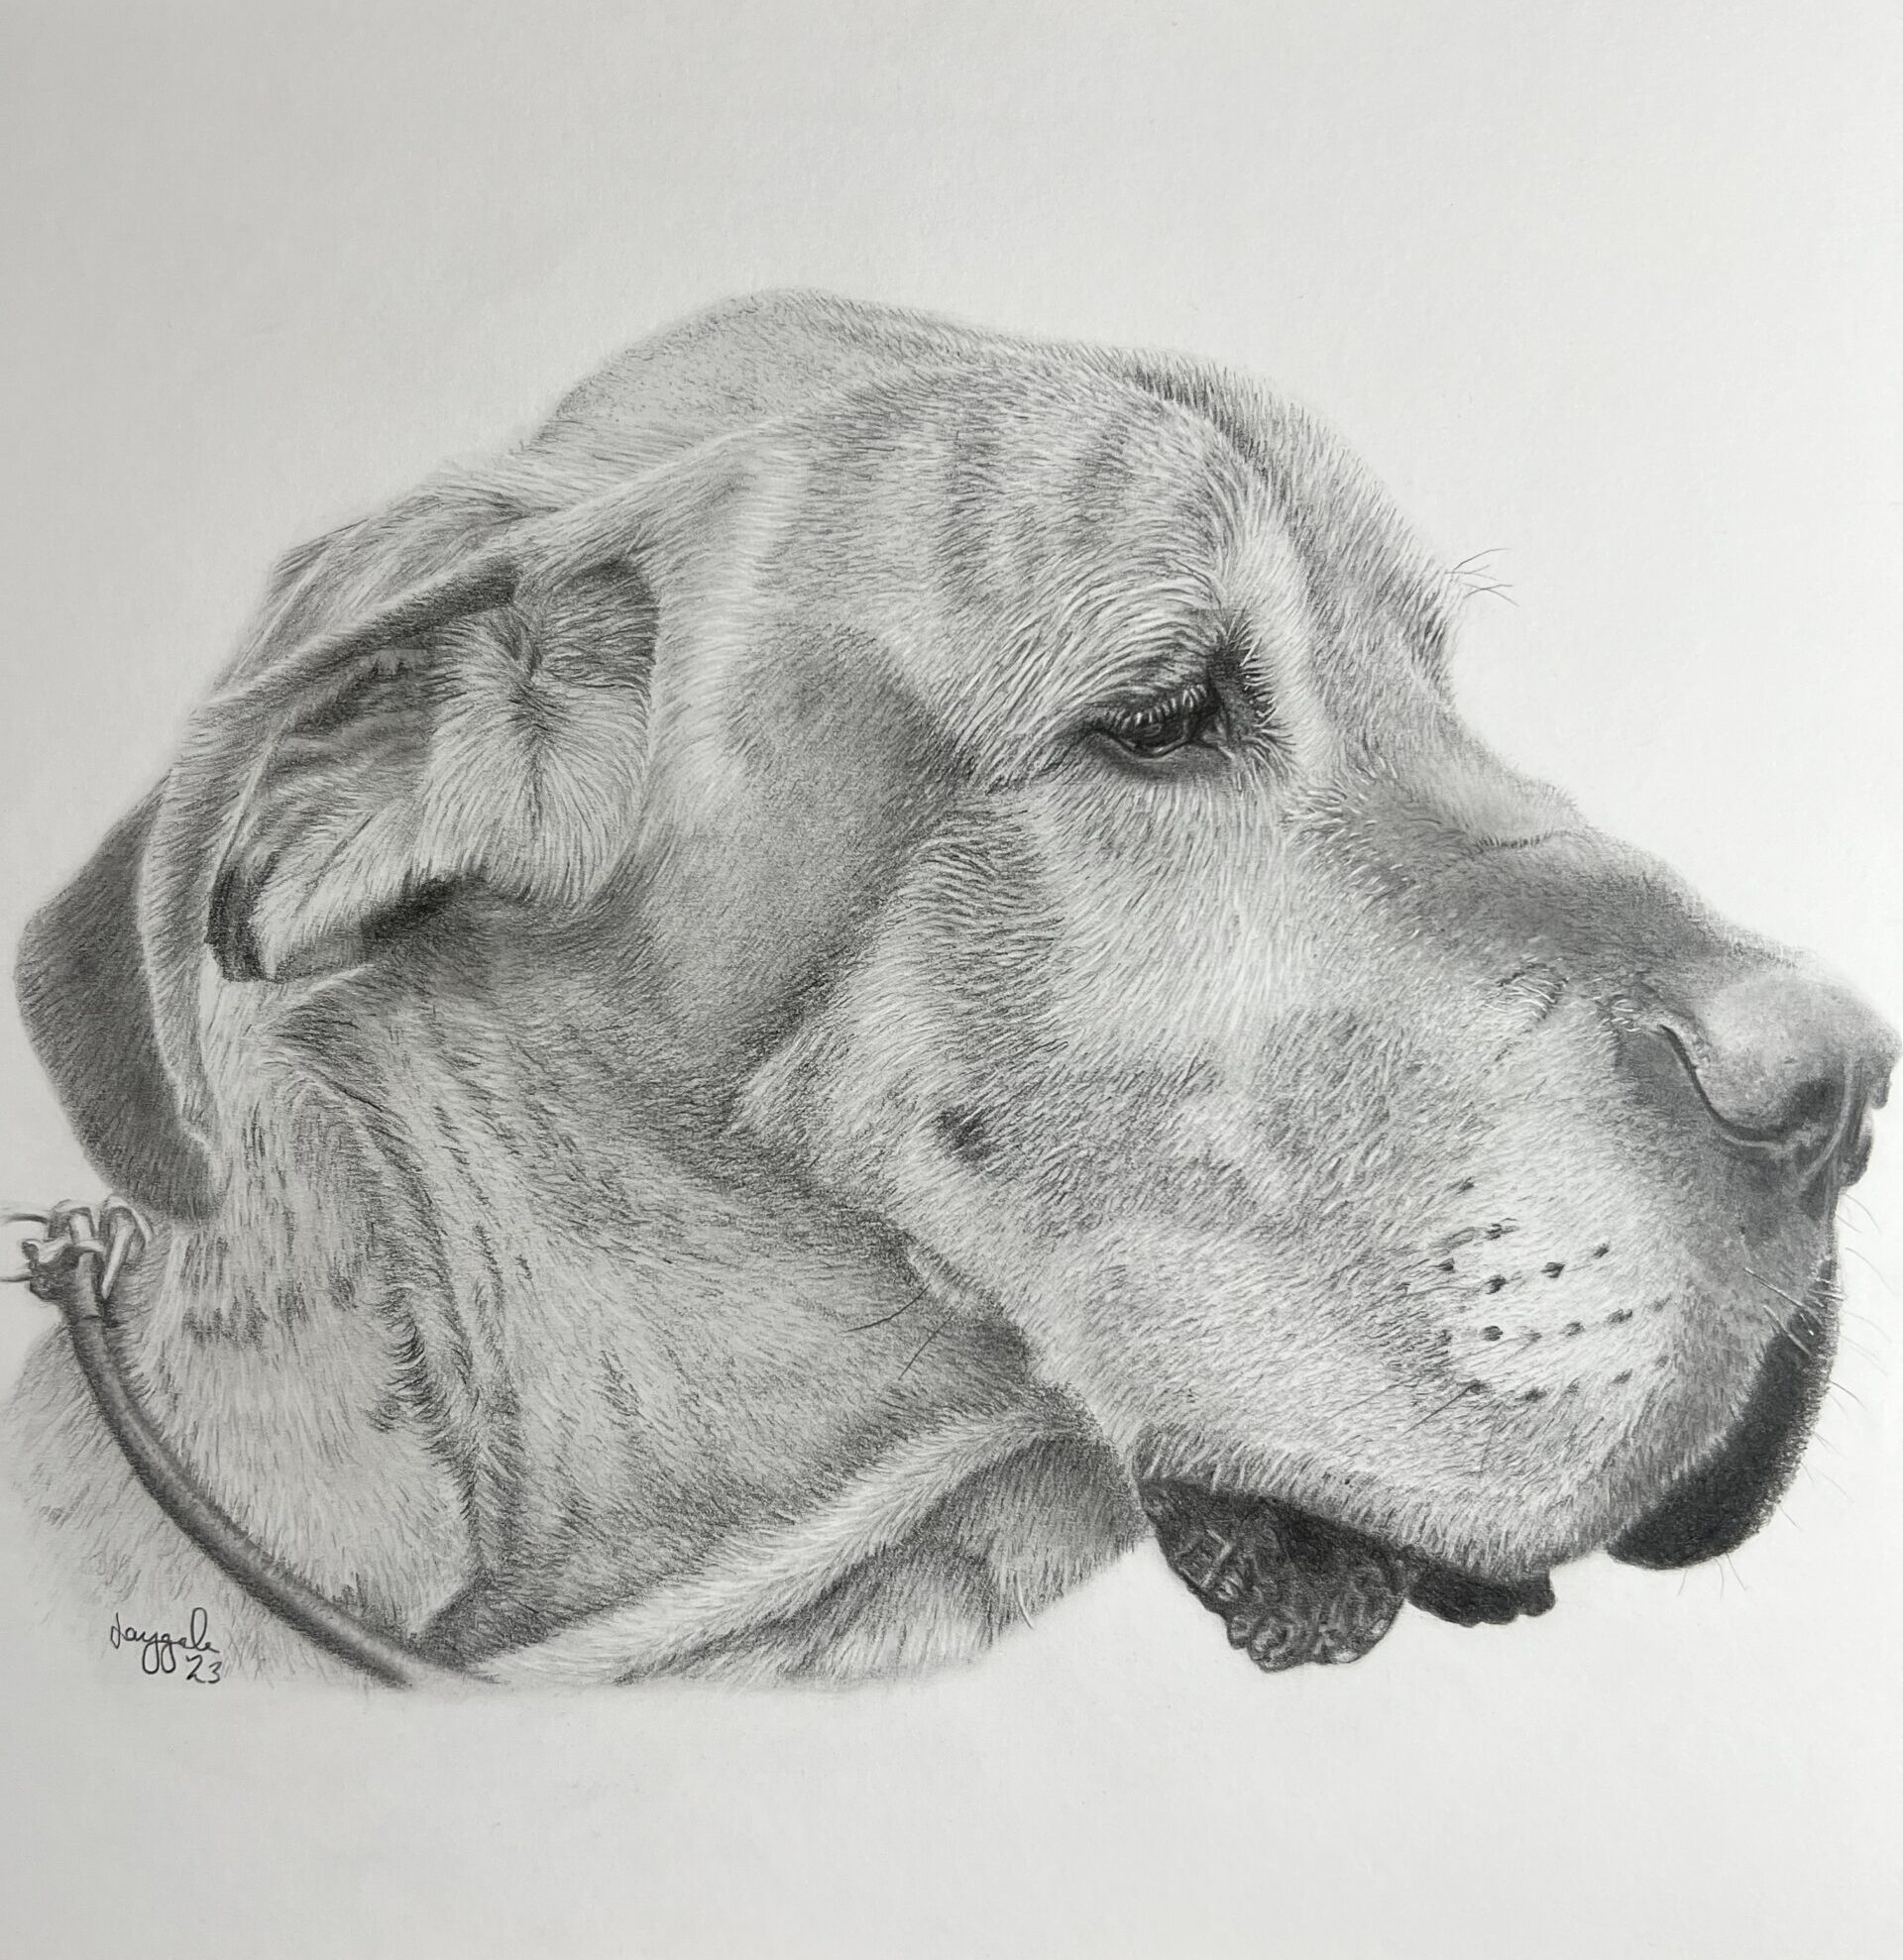 Photograph of graphite drawing of a great dane dog